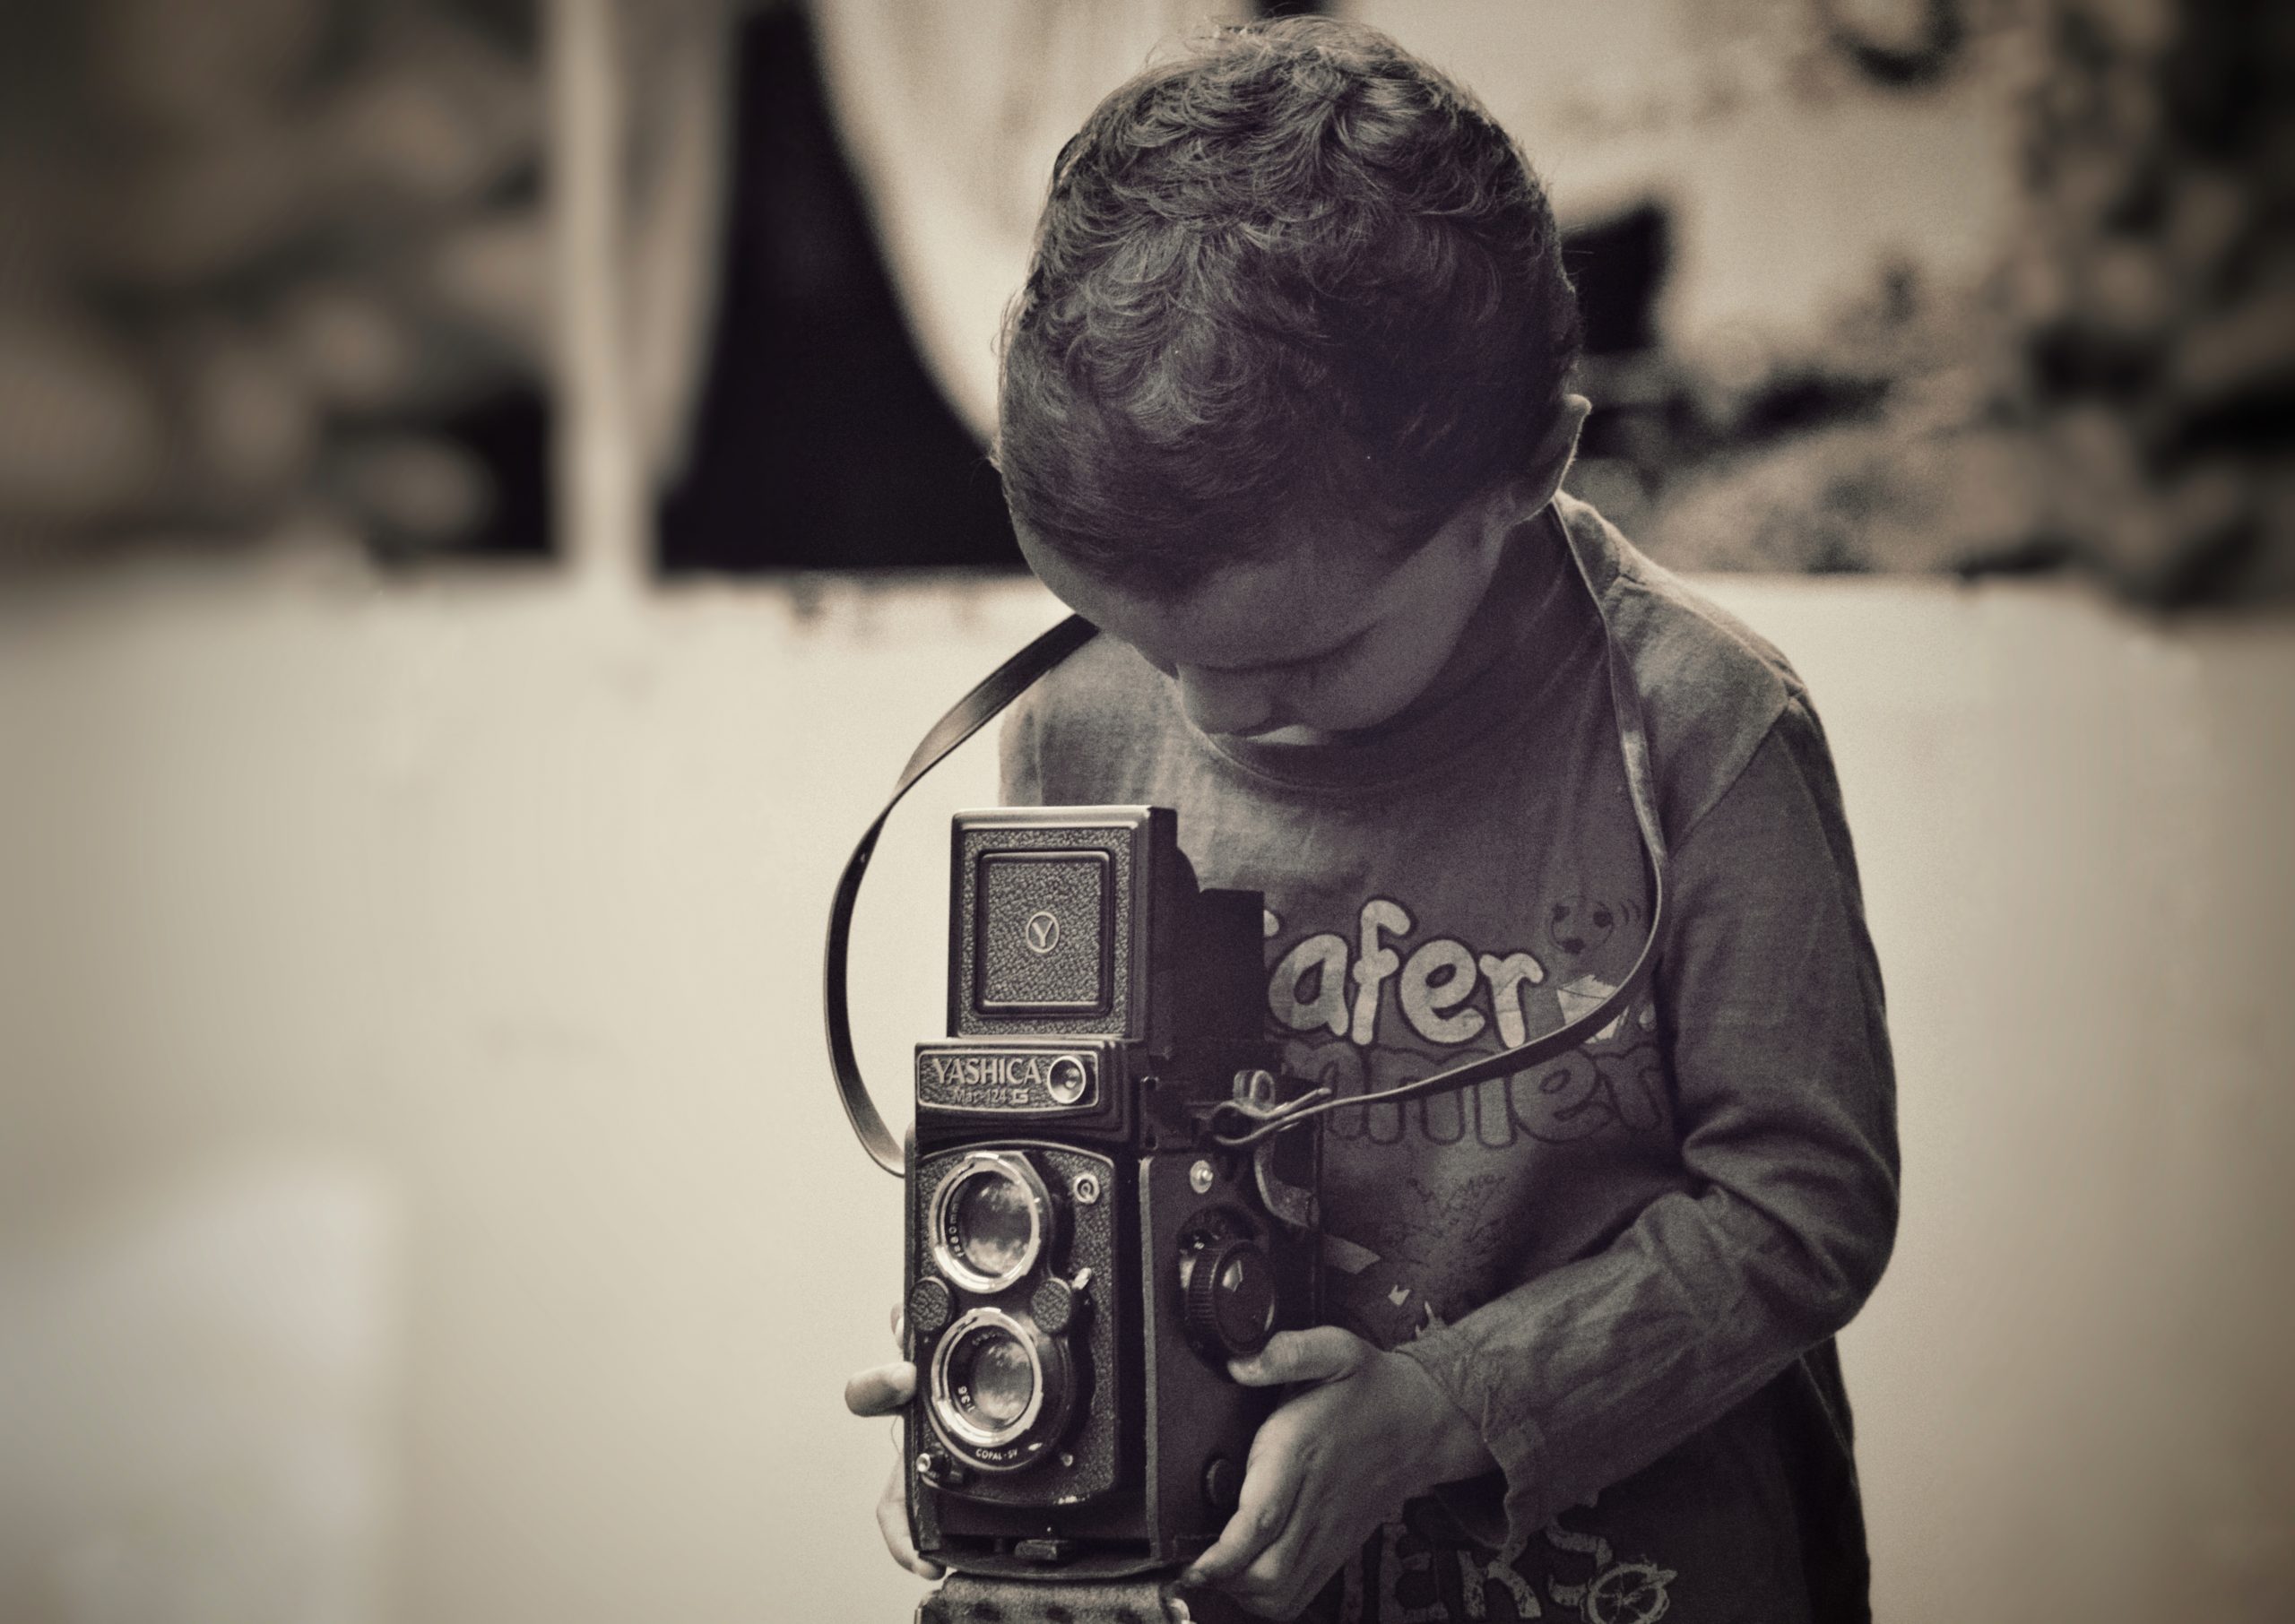 Kid with camera